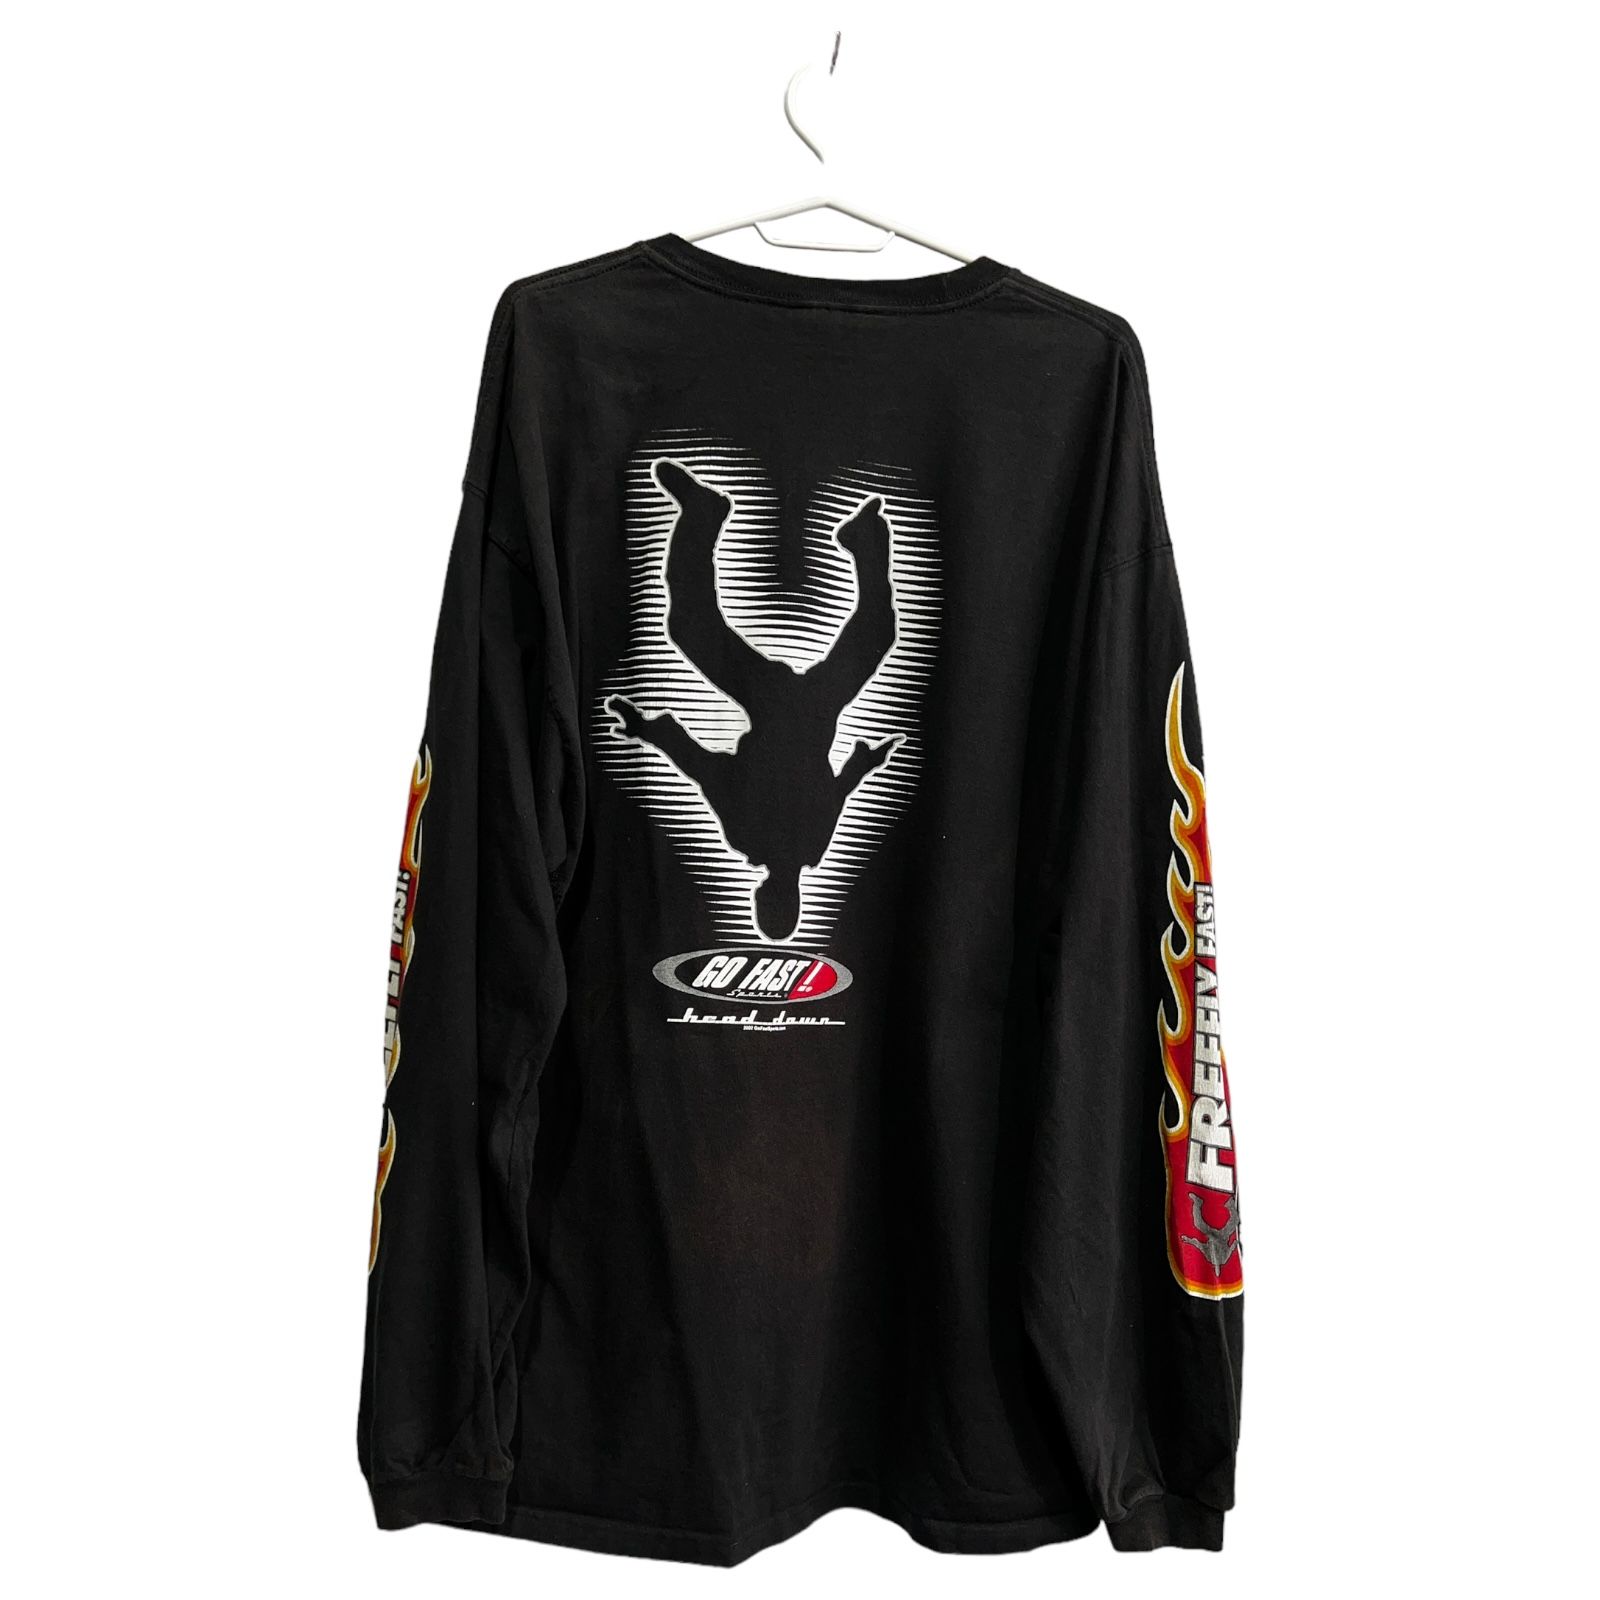 Pre-owned Moto X Racing 2002 Vintage Go Fast Racing Long Sleeve Shirt Size Xl In Black